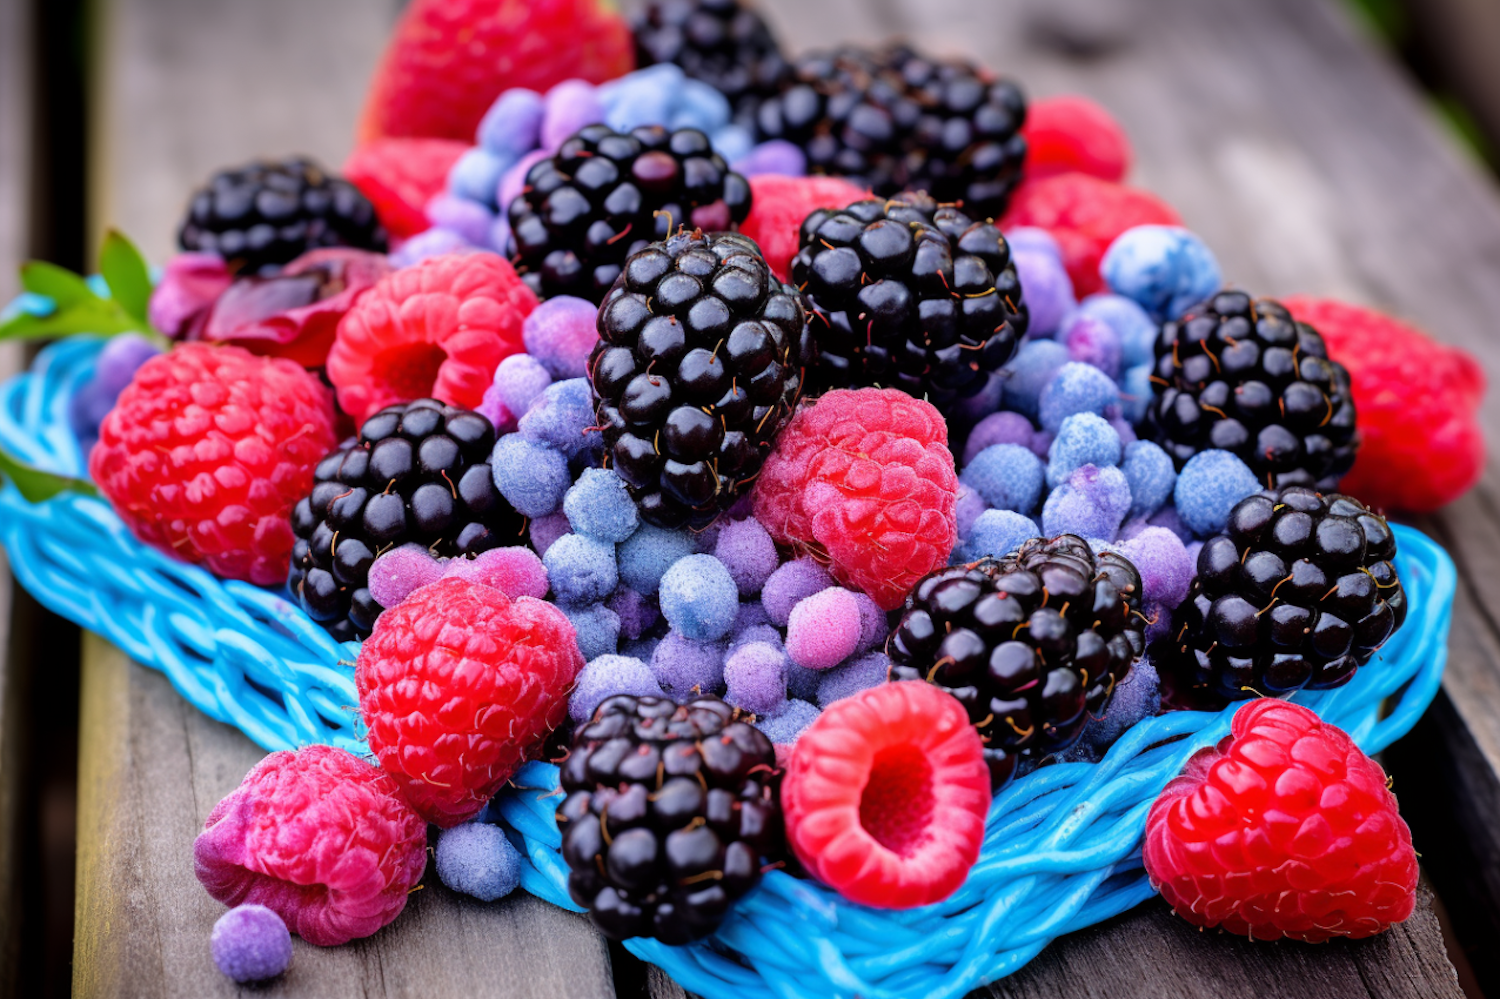 Berry Medley in a Blue Woven Basket